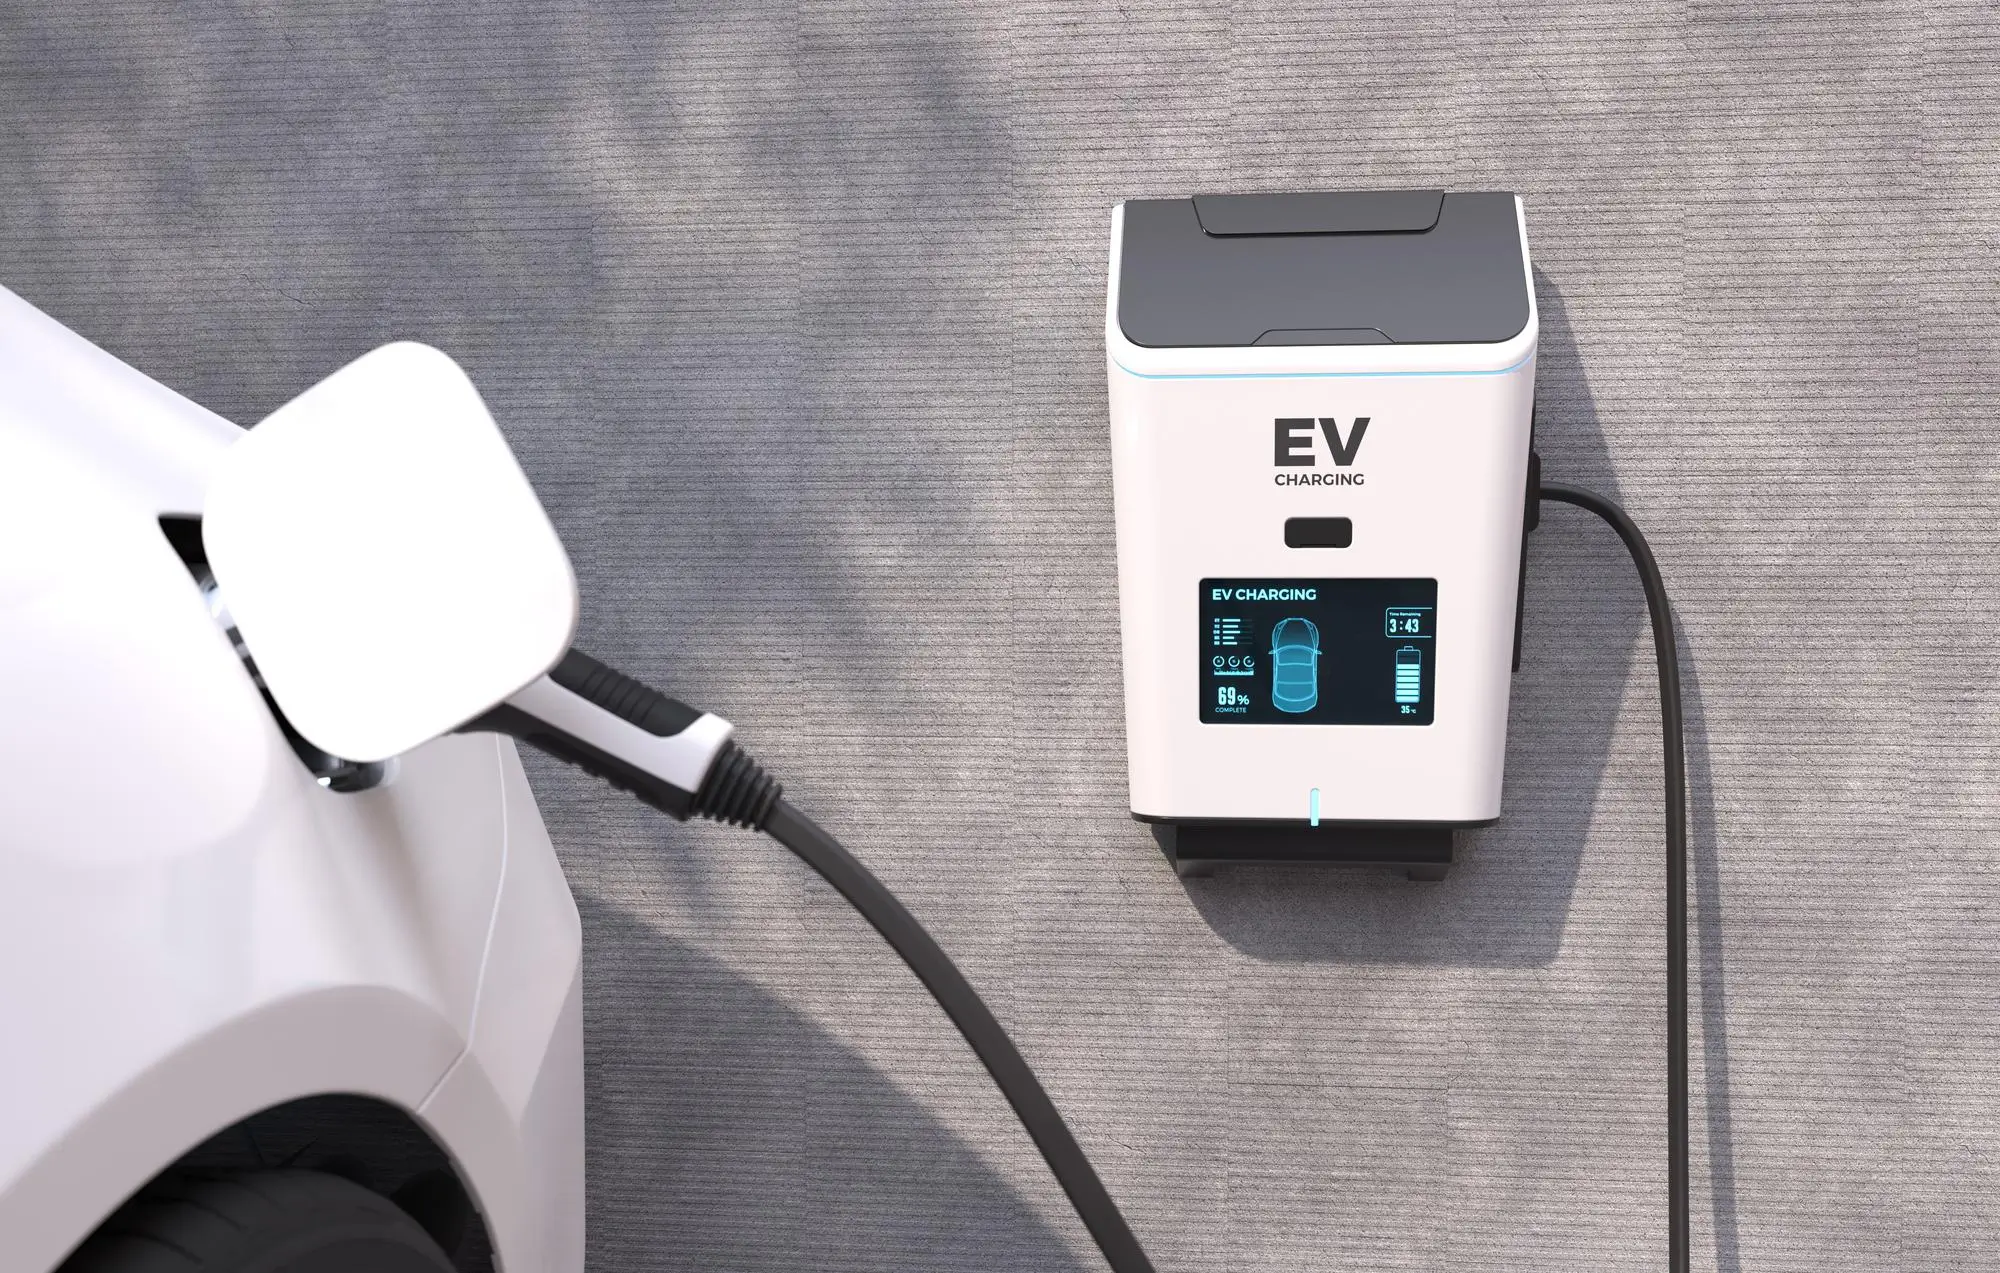 Close-up of an electric vehicle charging station in use, with a digital display indicating charge status, symbolizing the convenience and technology driving the EV revolution.